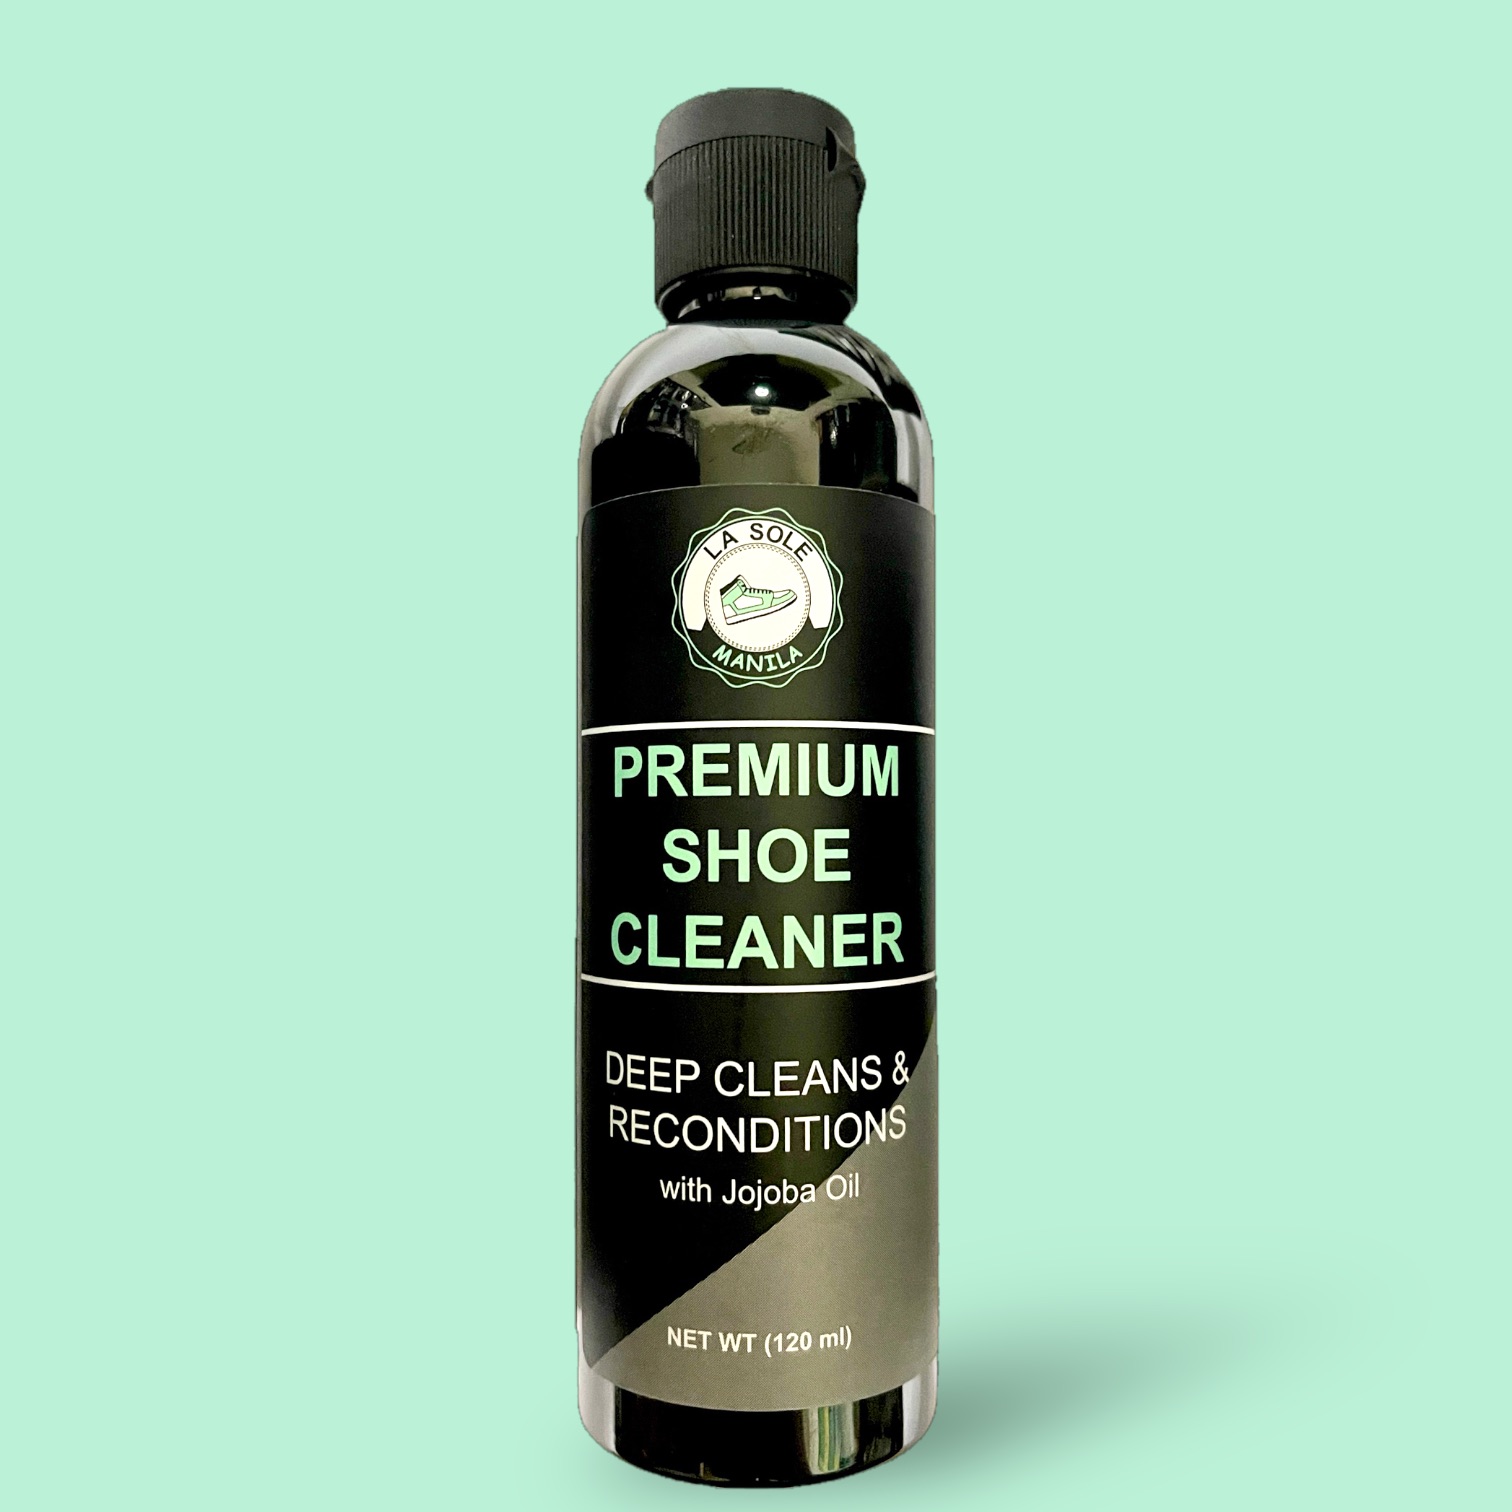 Premium Shoe Cleaner with Jojoba Oil by 